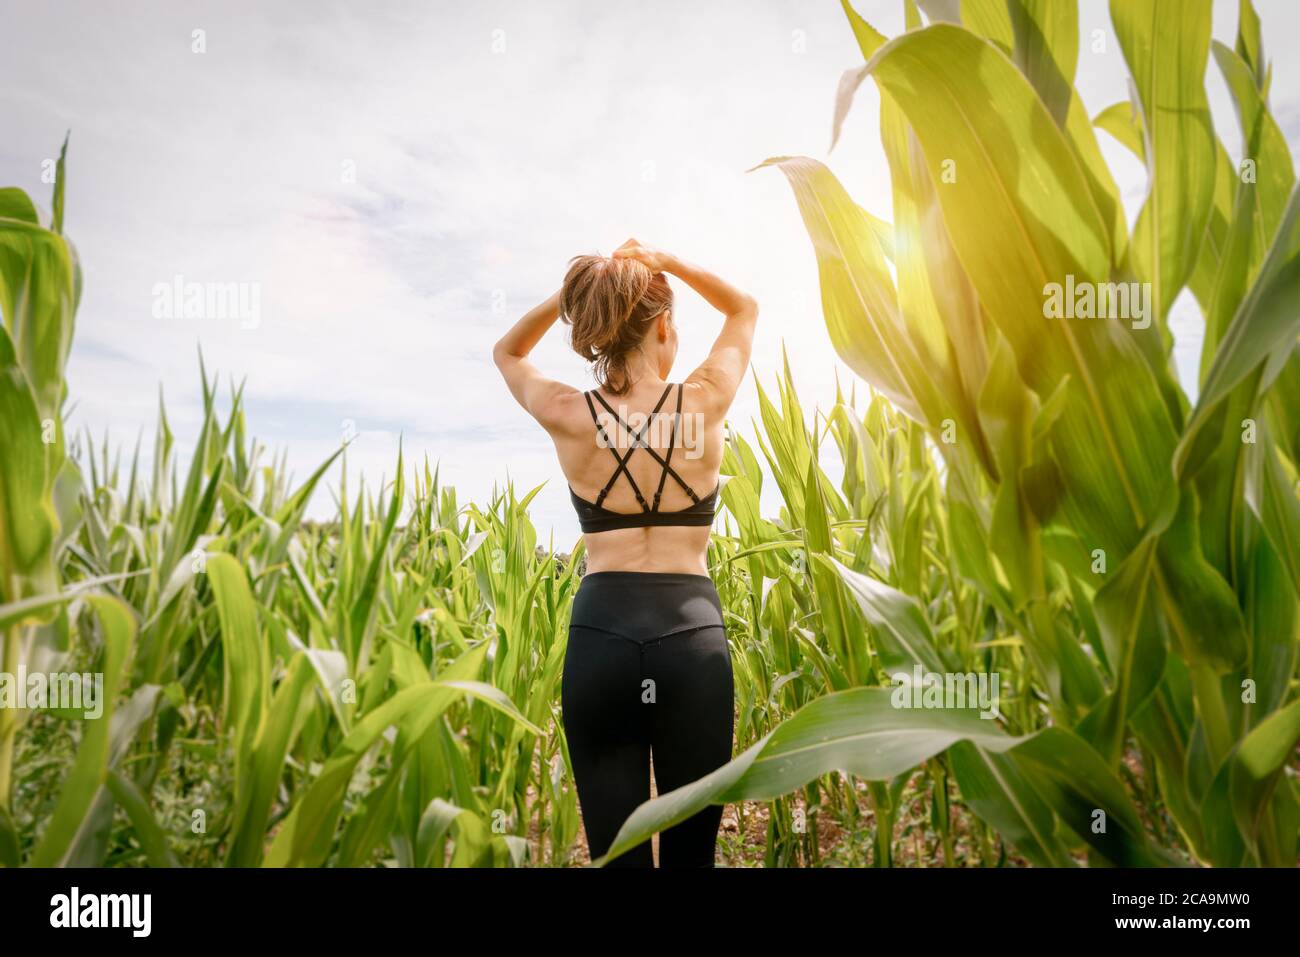 back view of a sporty woman tying her hair back before exercising. Green field with sun flare. Stock Photo